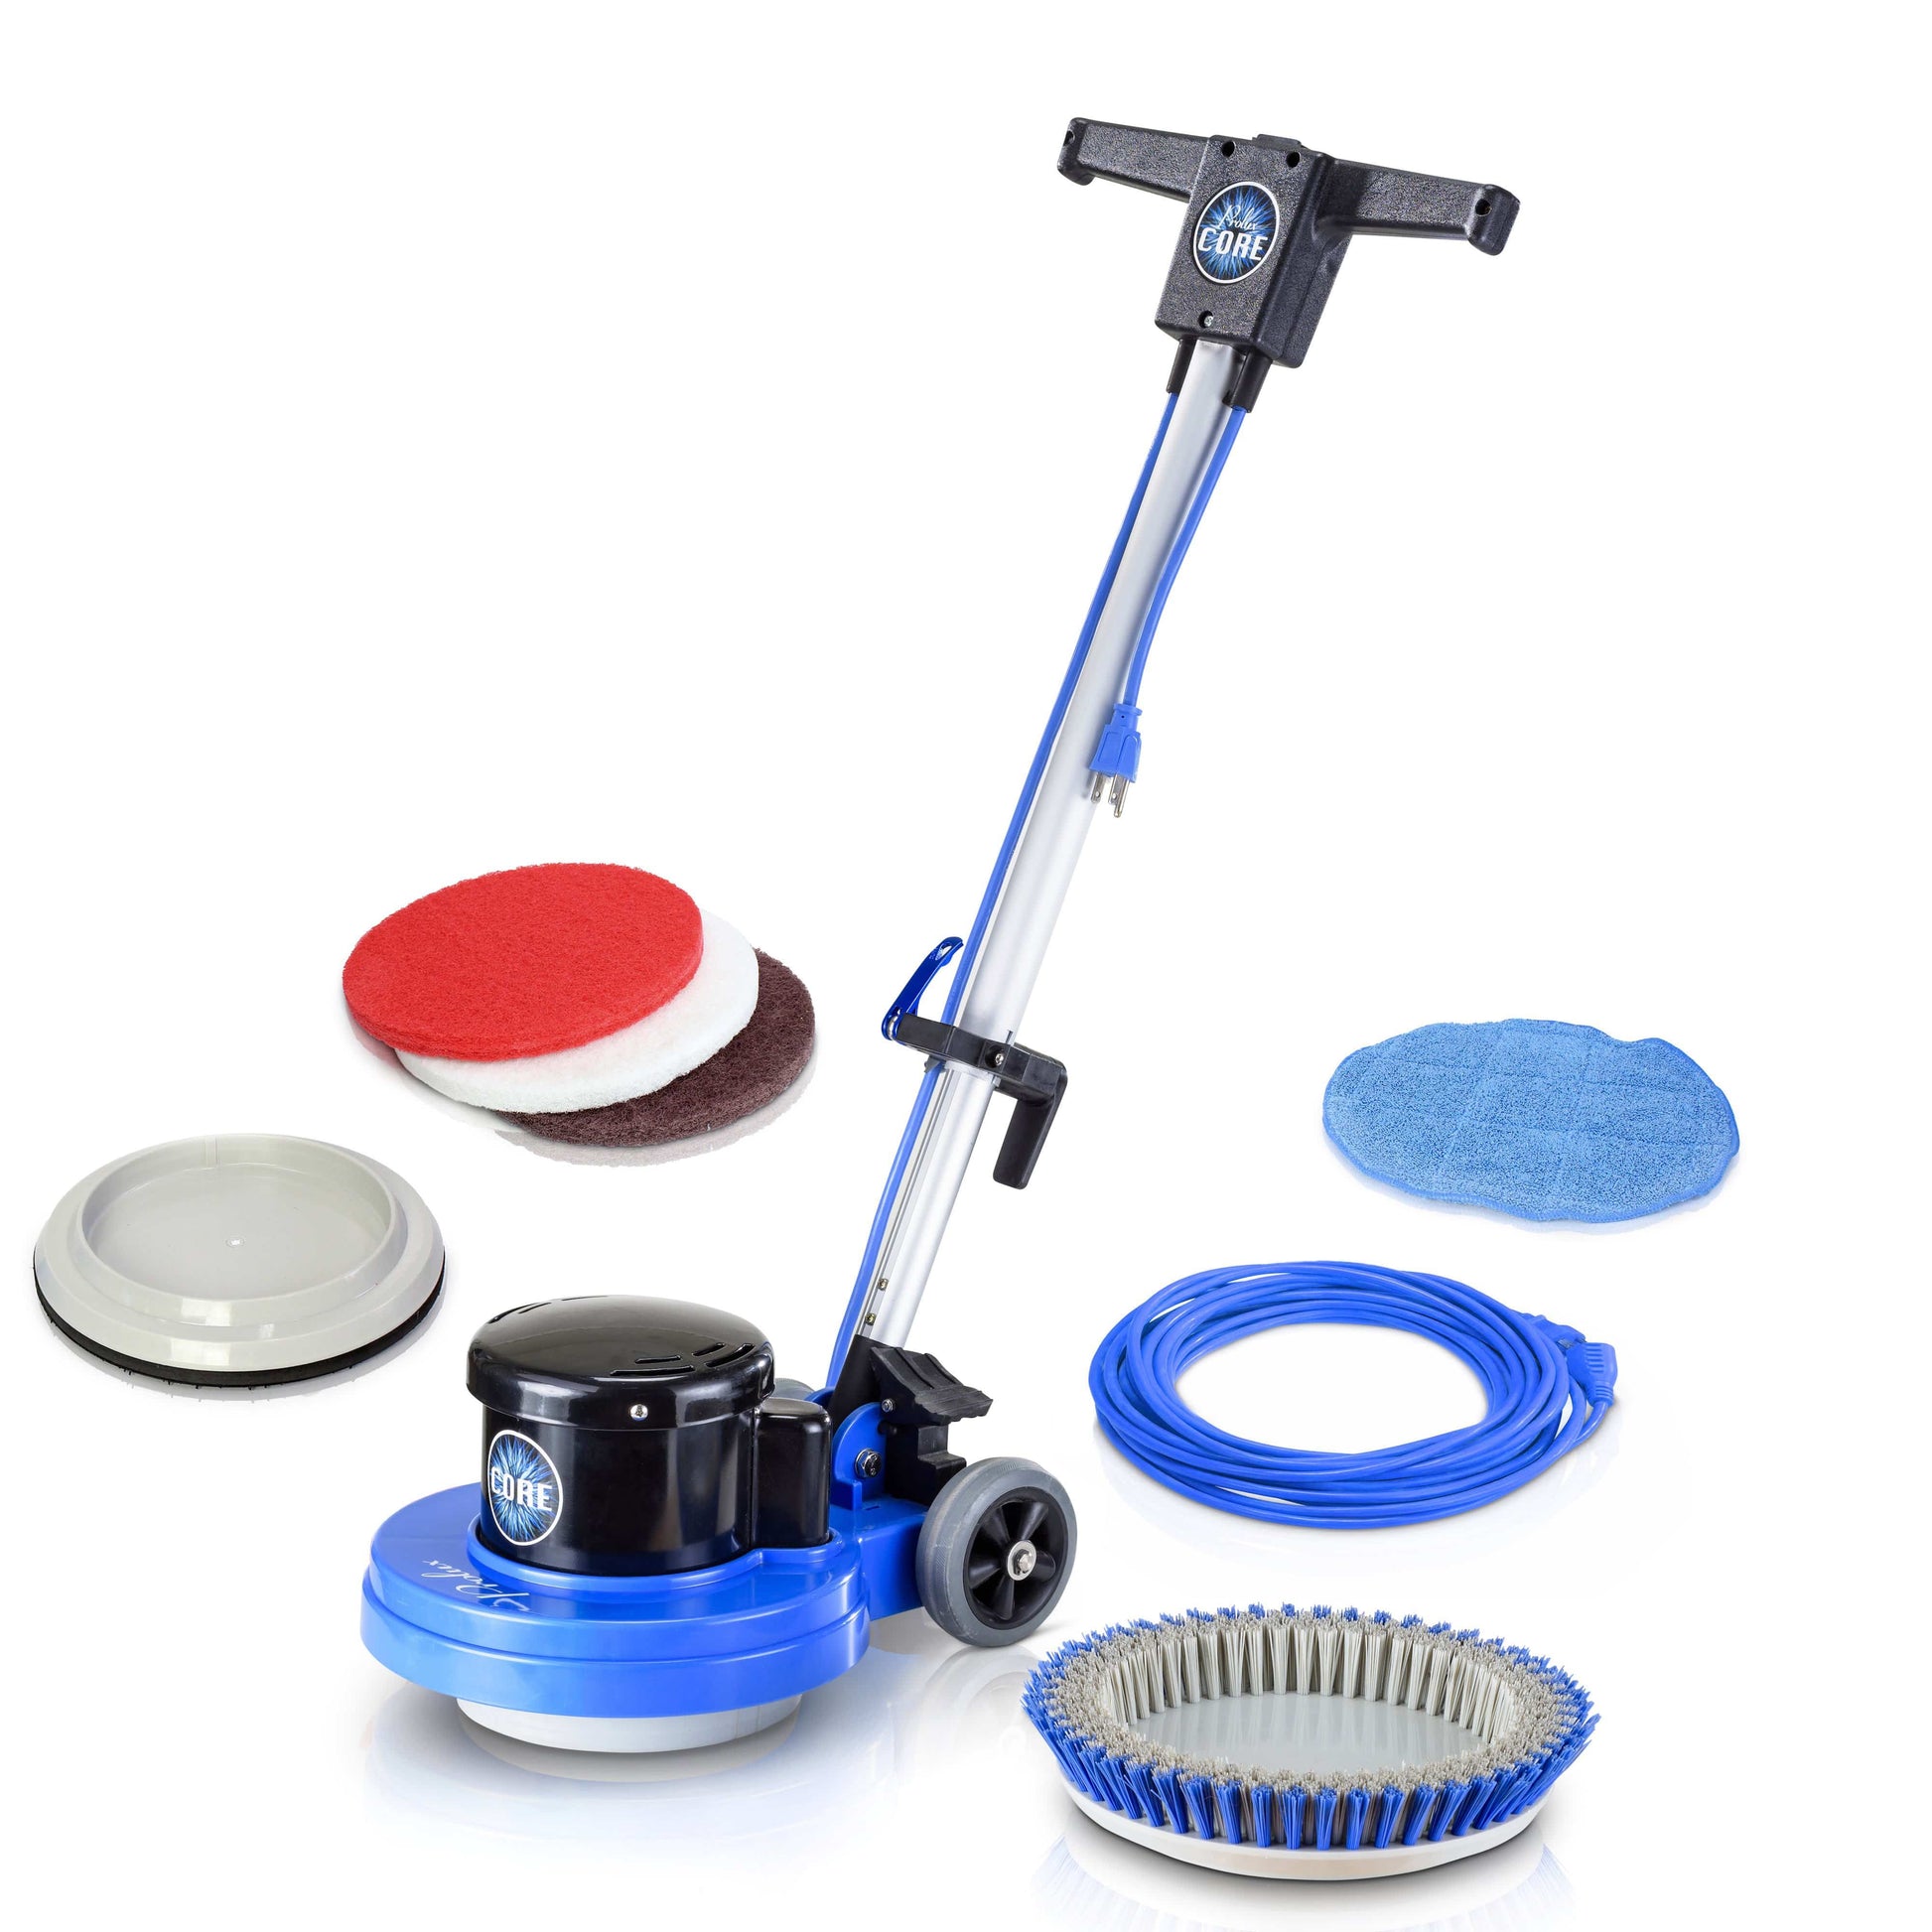 Floor Scrubbers & Accessories at